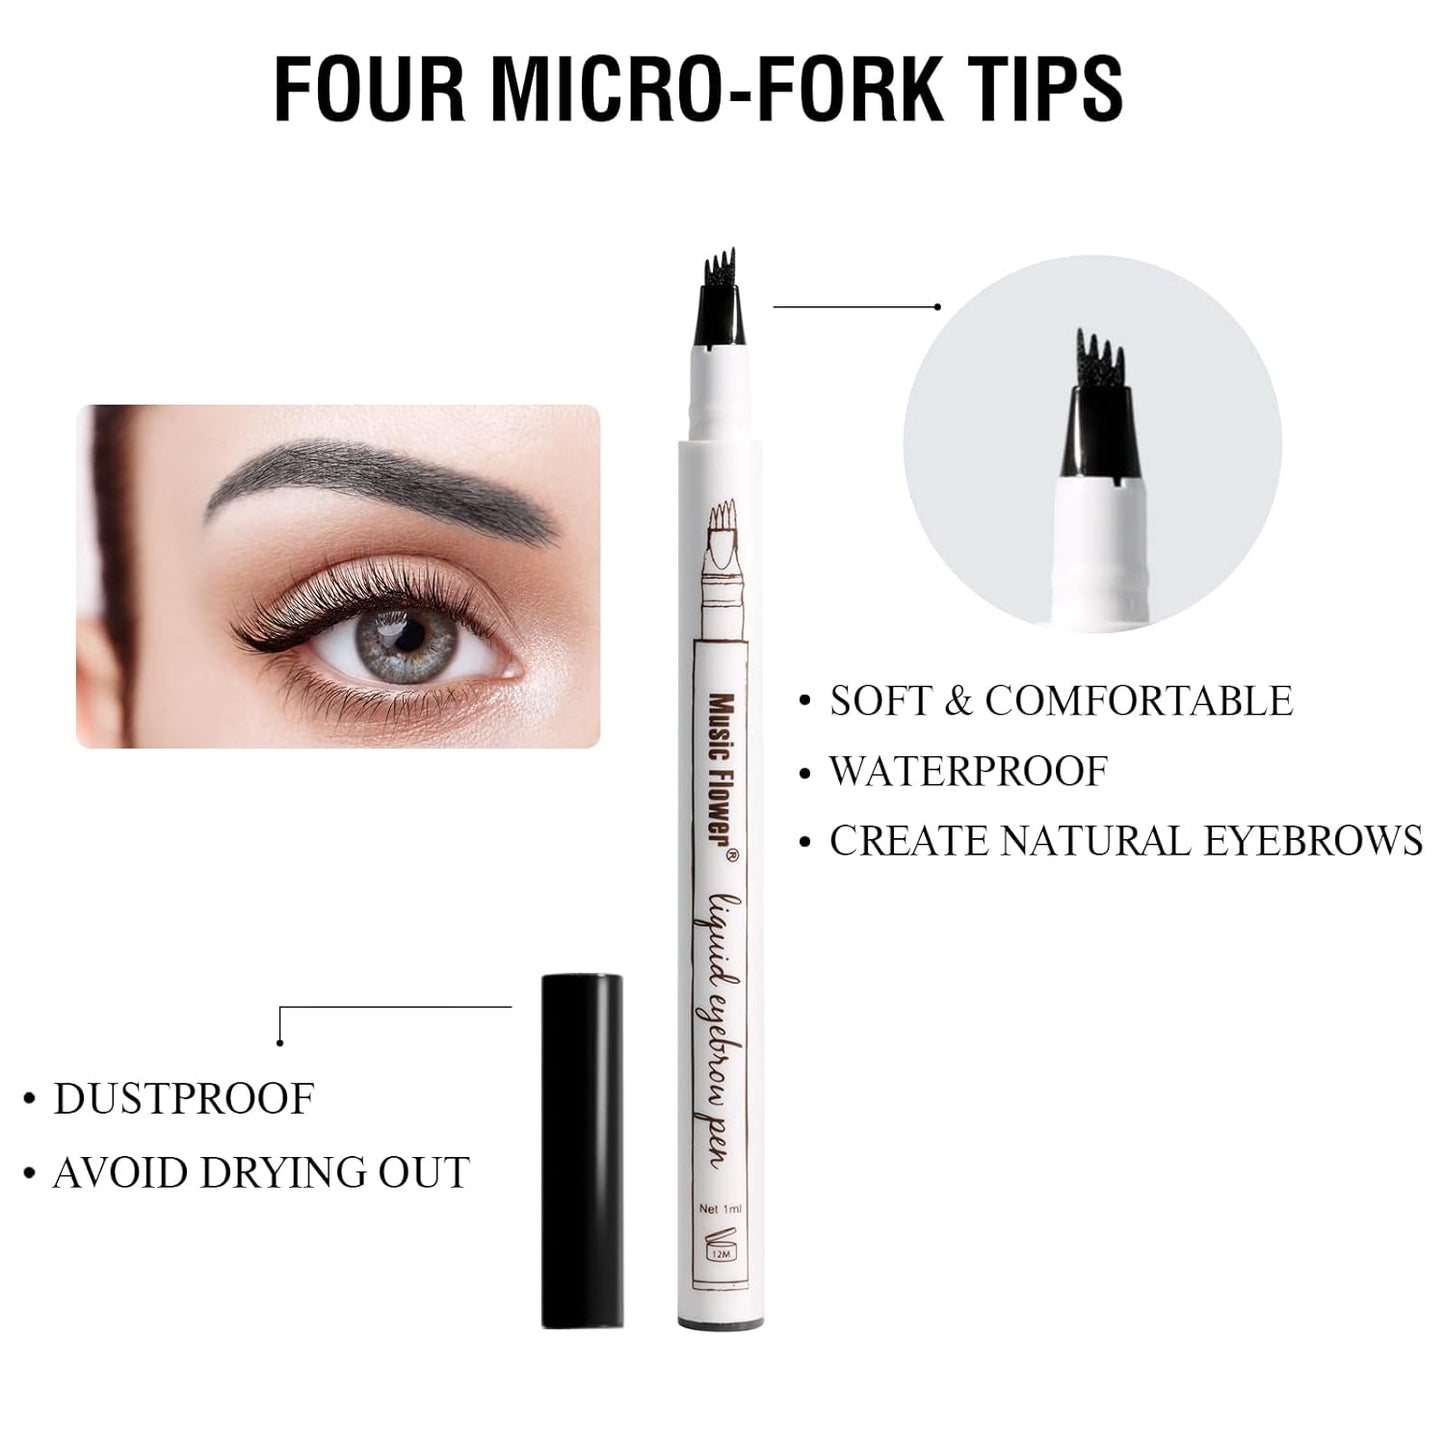 New Waterproof Eyebrow Pencil with Micro-Fork Tip | Multi- Purpose Usage for Eyebrows & hair line 😍BUY 1 GET 1 FREE 😍